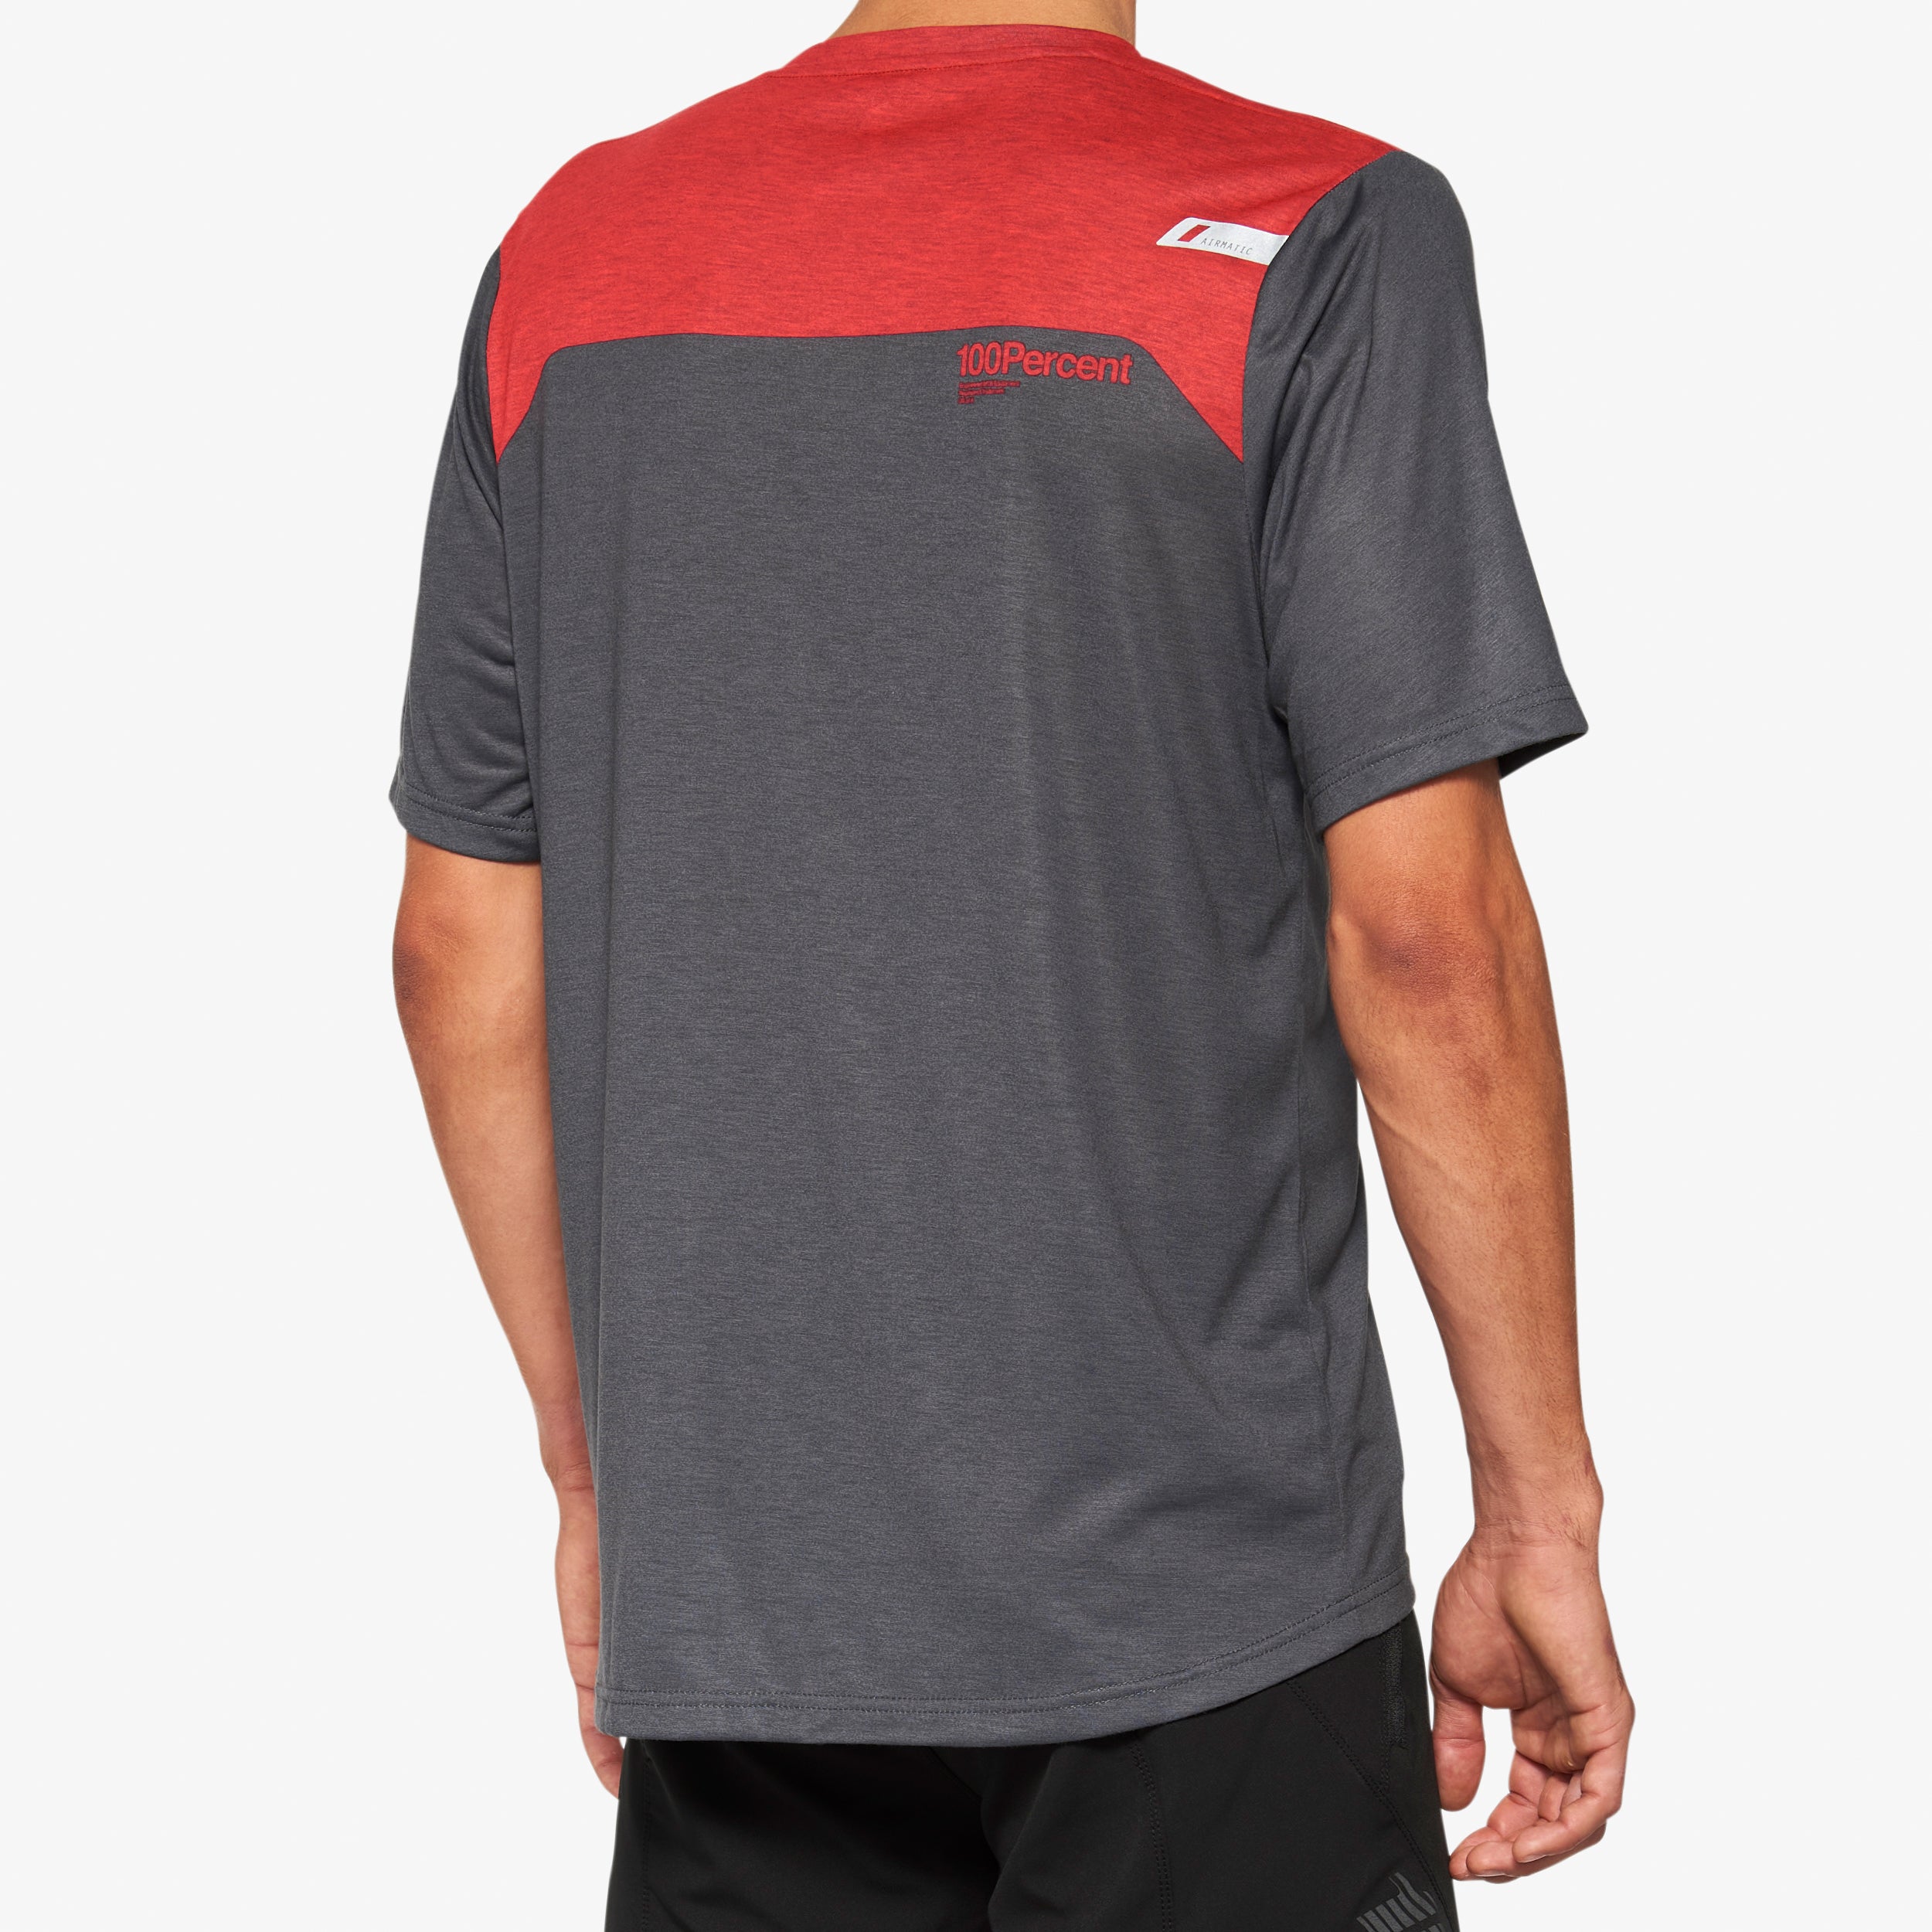 AIRMATIC Short Sleeve Jersey Charcoal/Racer Red - Secondary